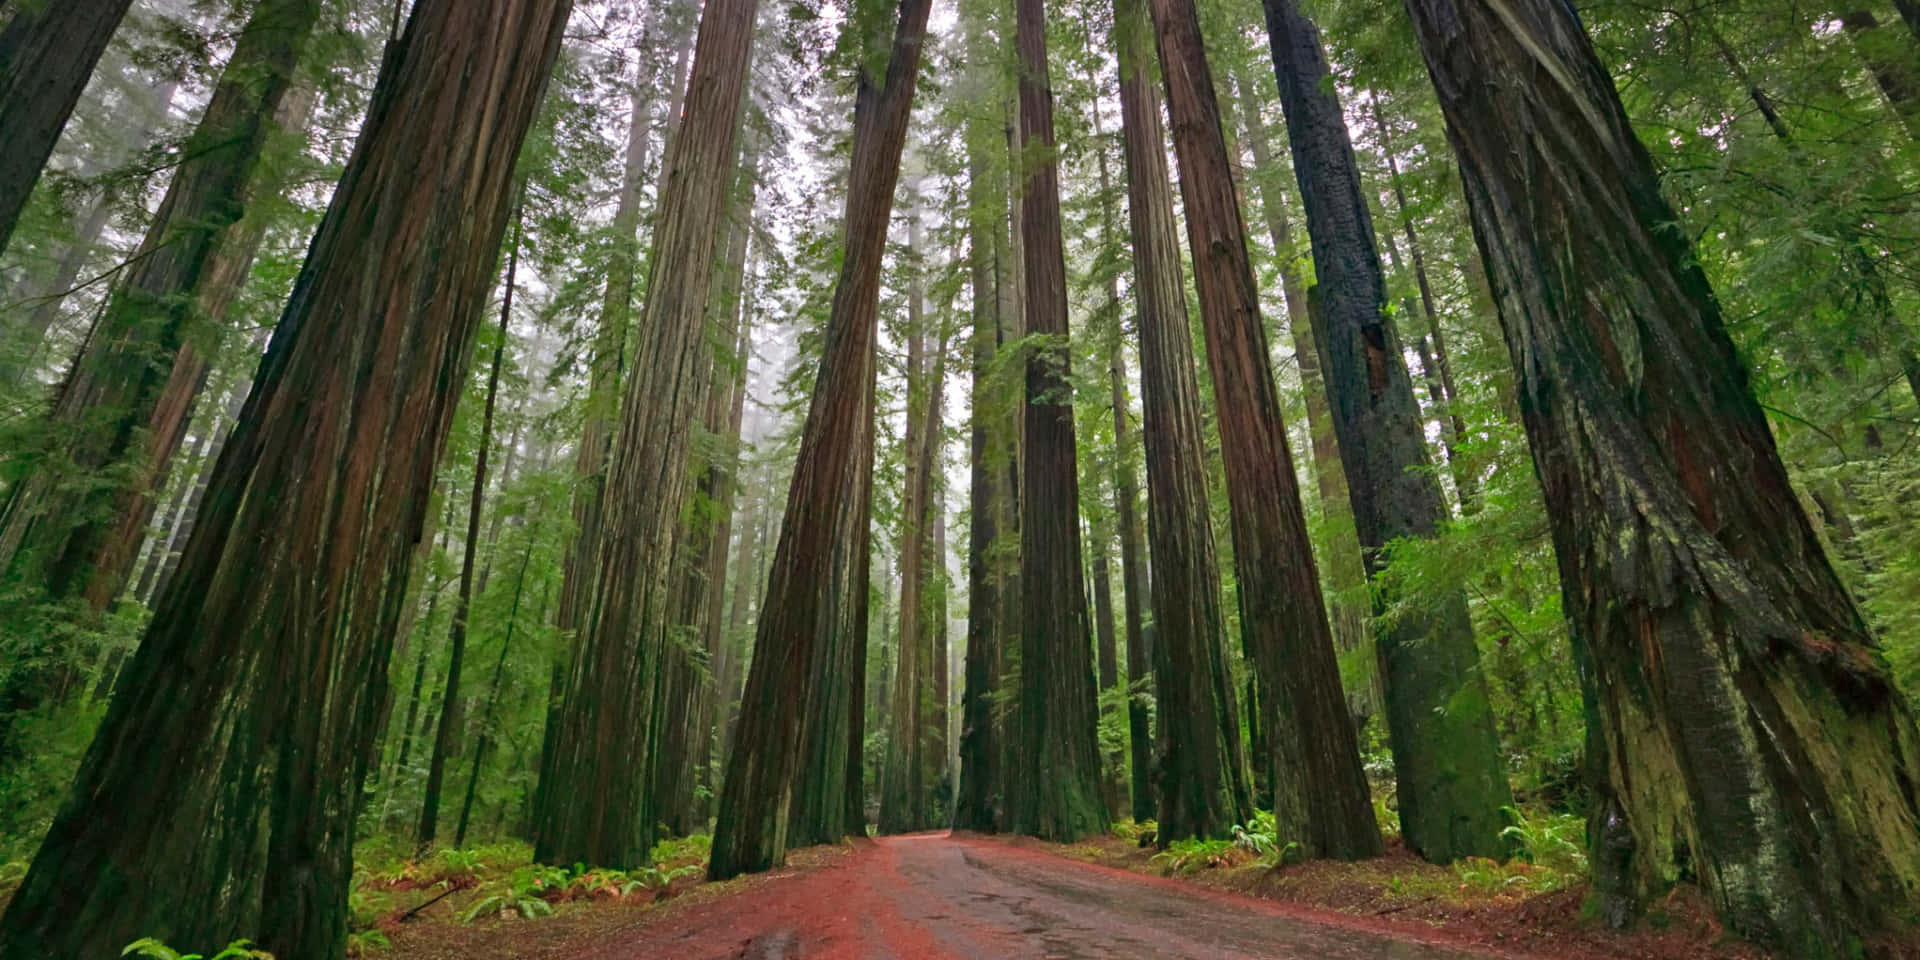 "The majestic and ancient Redwood trees of California".